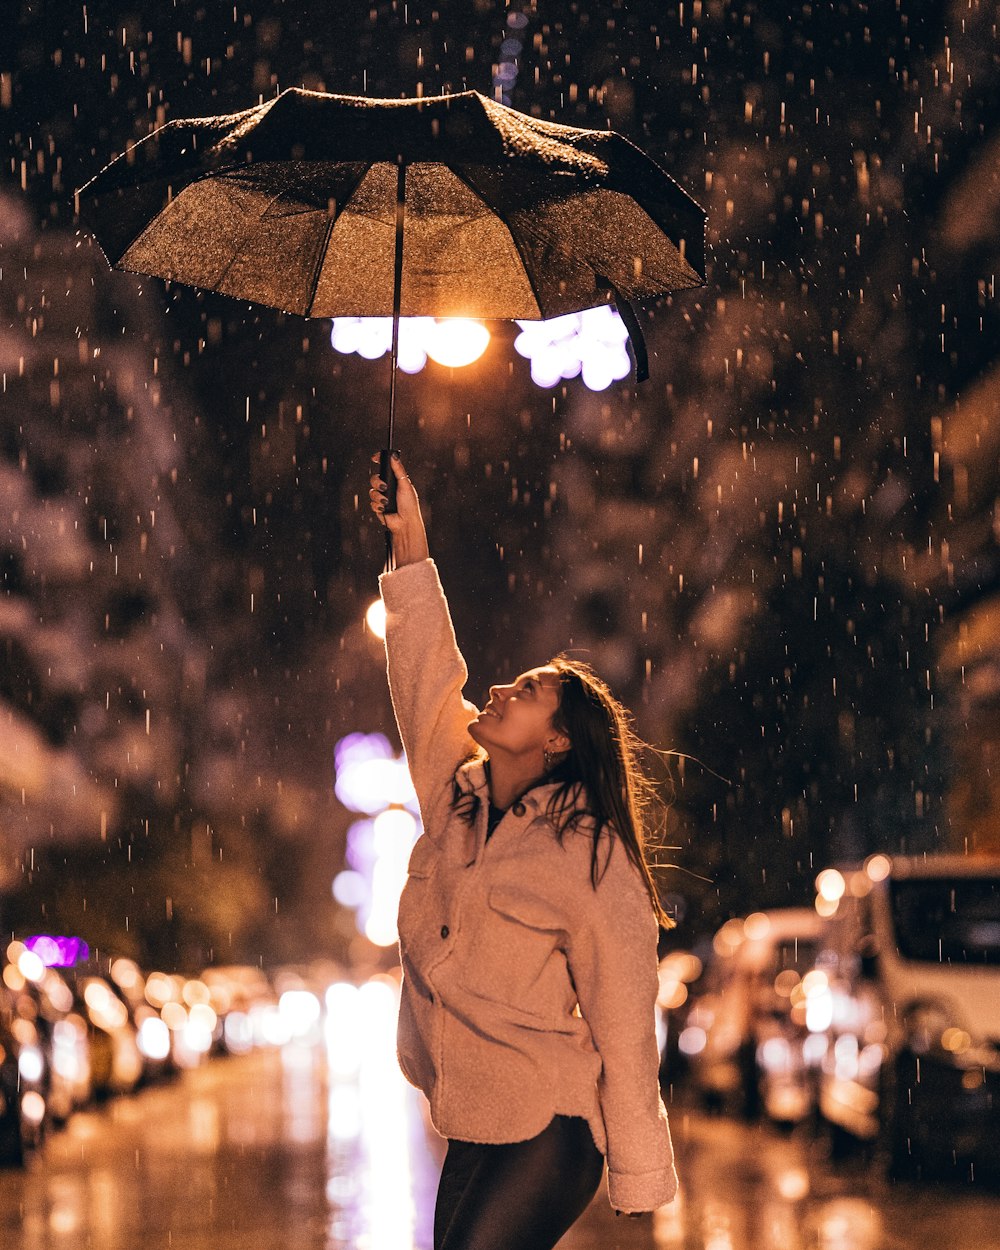 woman in brown coat holding umbrella during night time